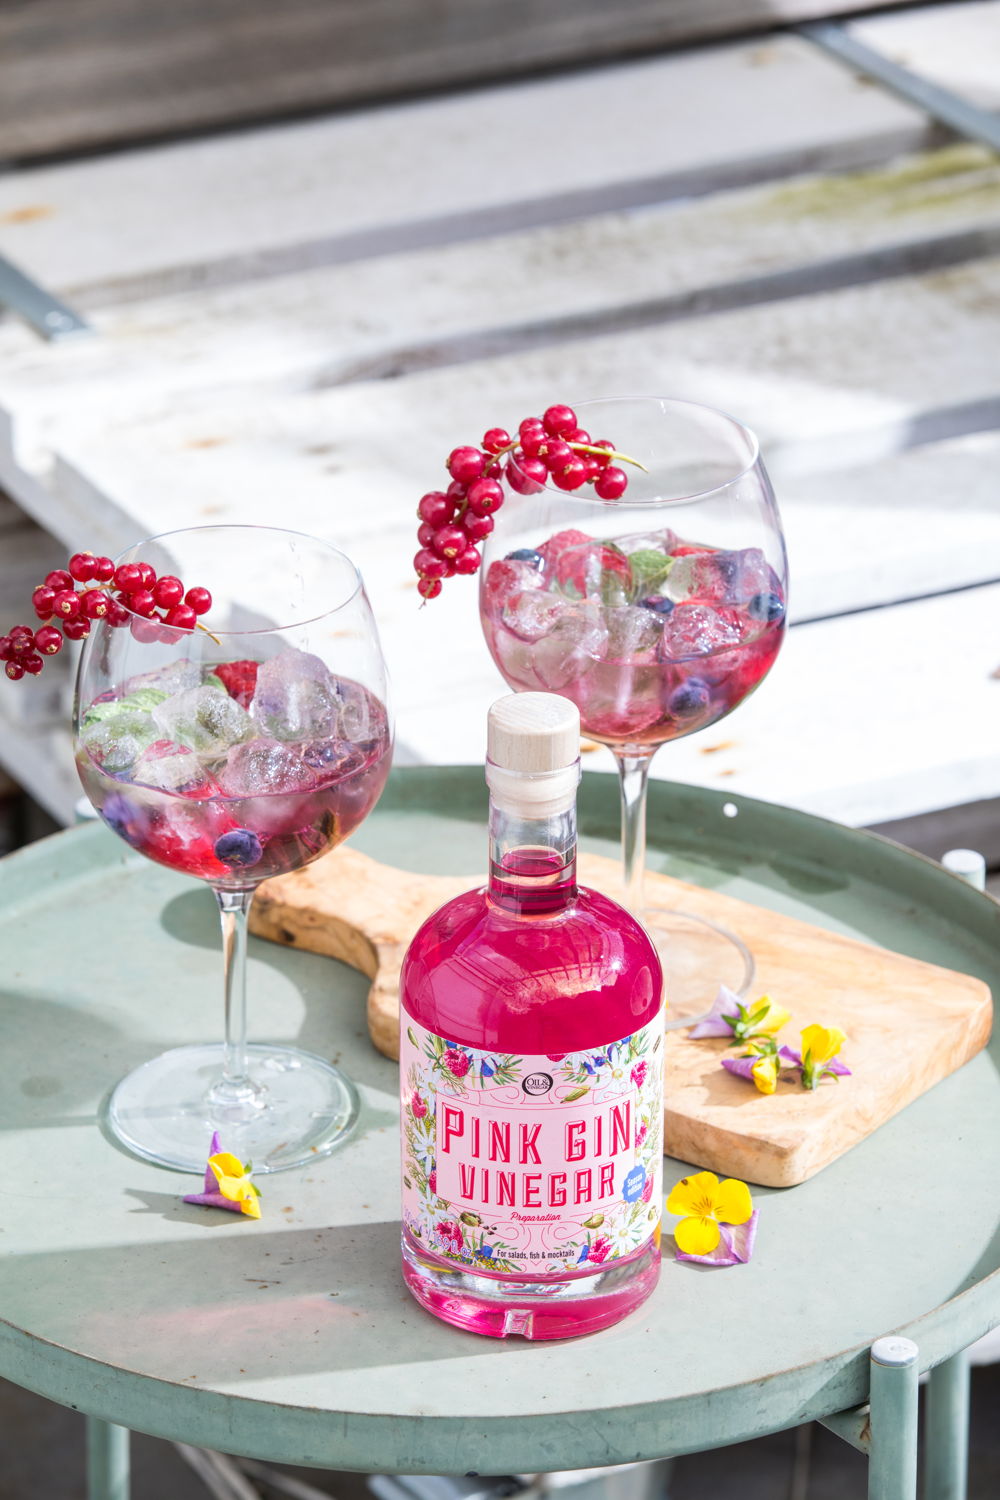 Why not try a glass of Pink Gin & Prosecco drink with red fruit? 